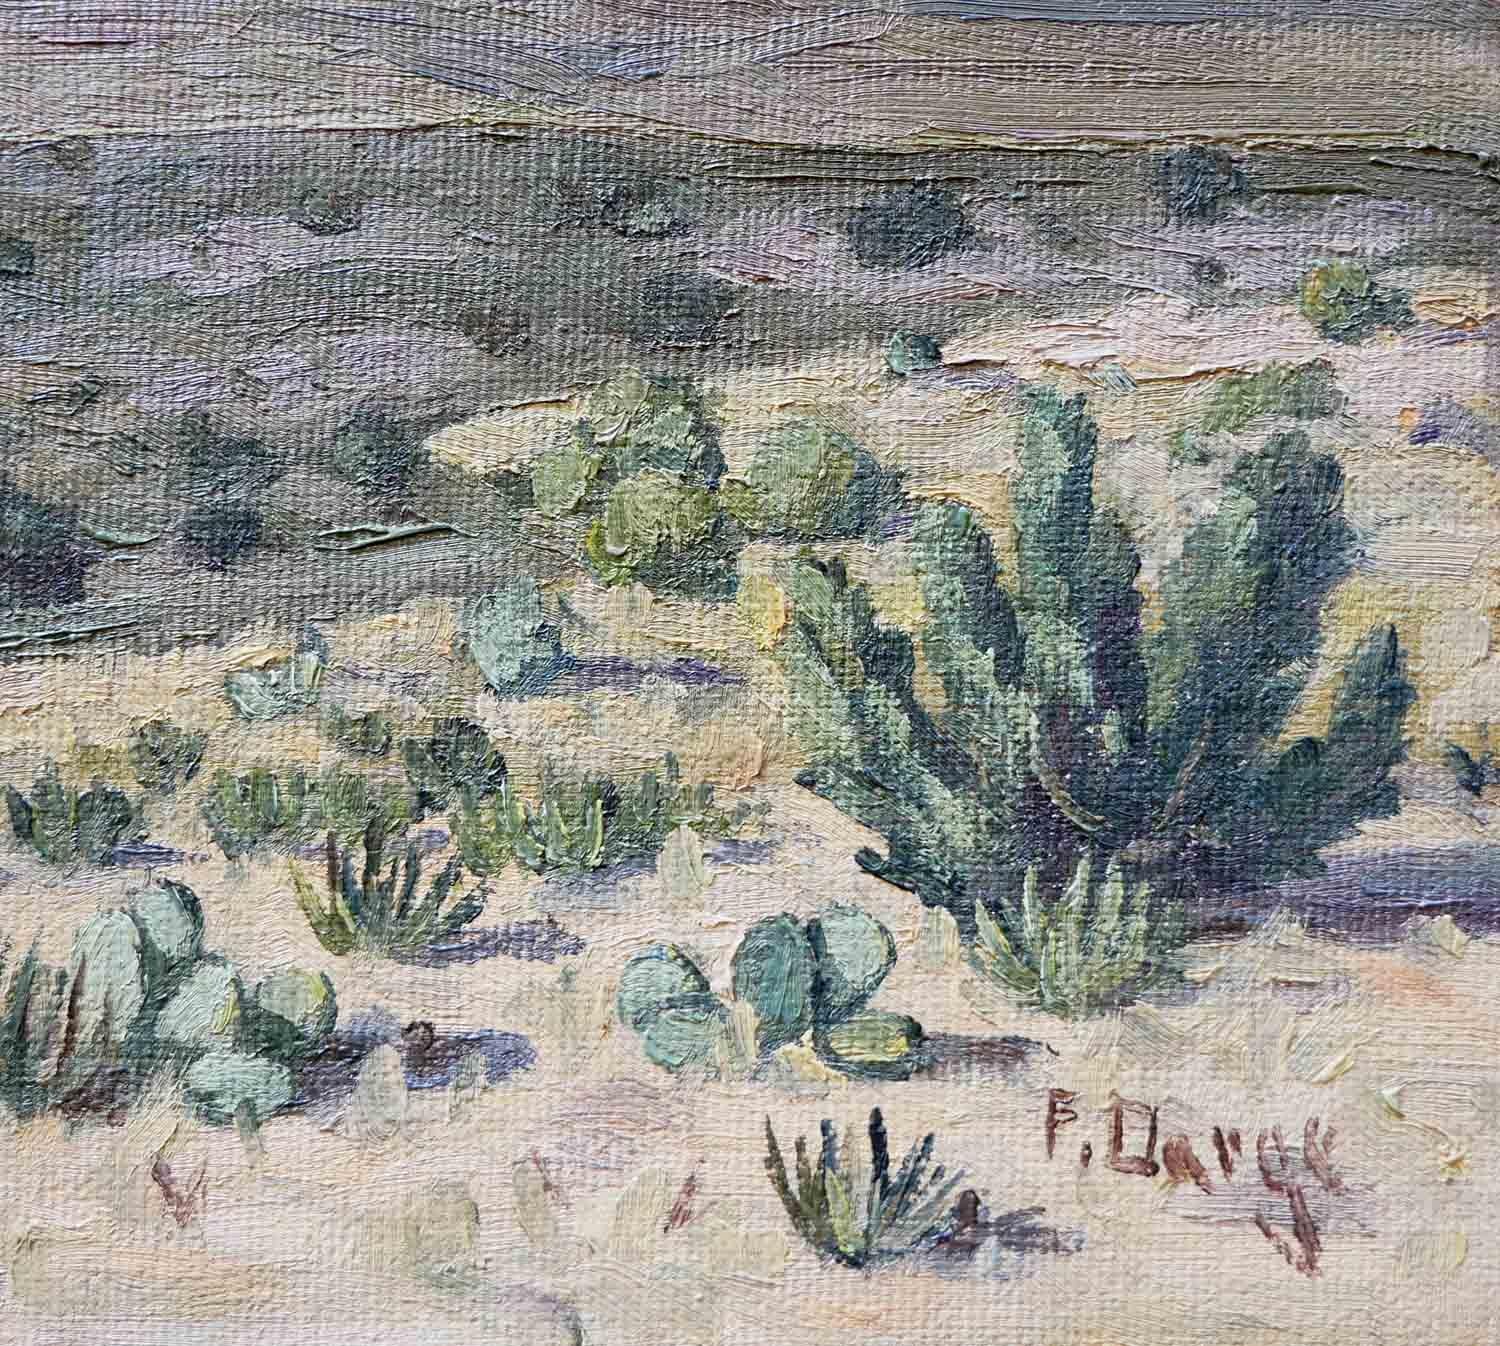 Pastel-toned abstract impressionist desert landscape by German artist Fred Darge. This painting depicts a Wichita Mountain Wildlife Refuge, a desert landscape in Oklahoma. It features a calming early morning scene with clear skies. Signed by the